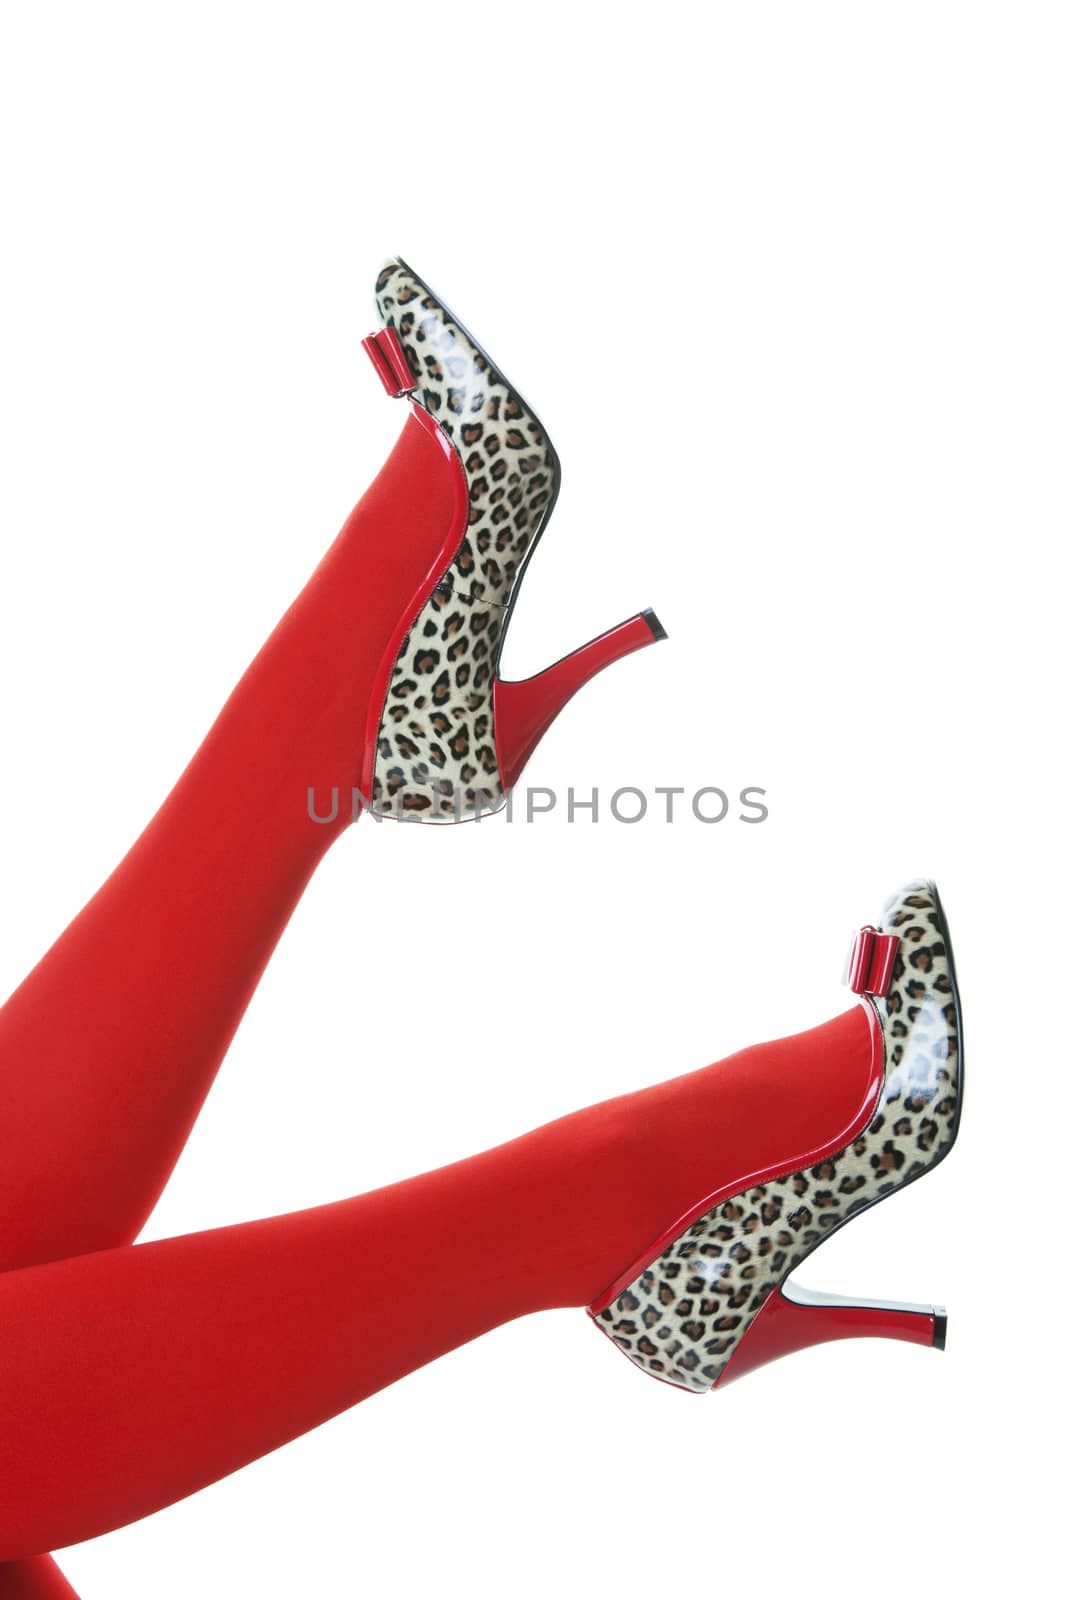 Beautiful red stockings, with red and animal print, rockabilly style high heels kicking up into the air.  Shot on white background.